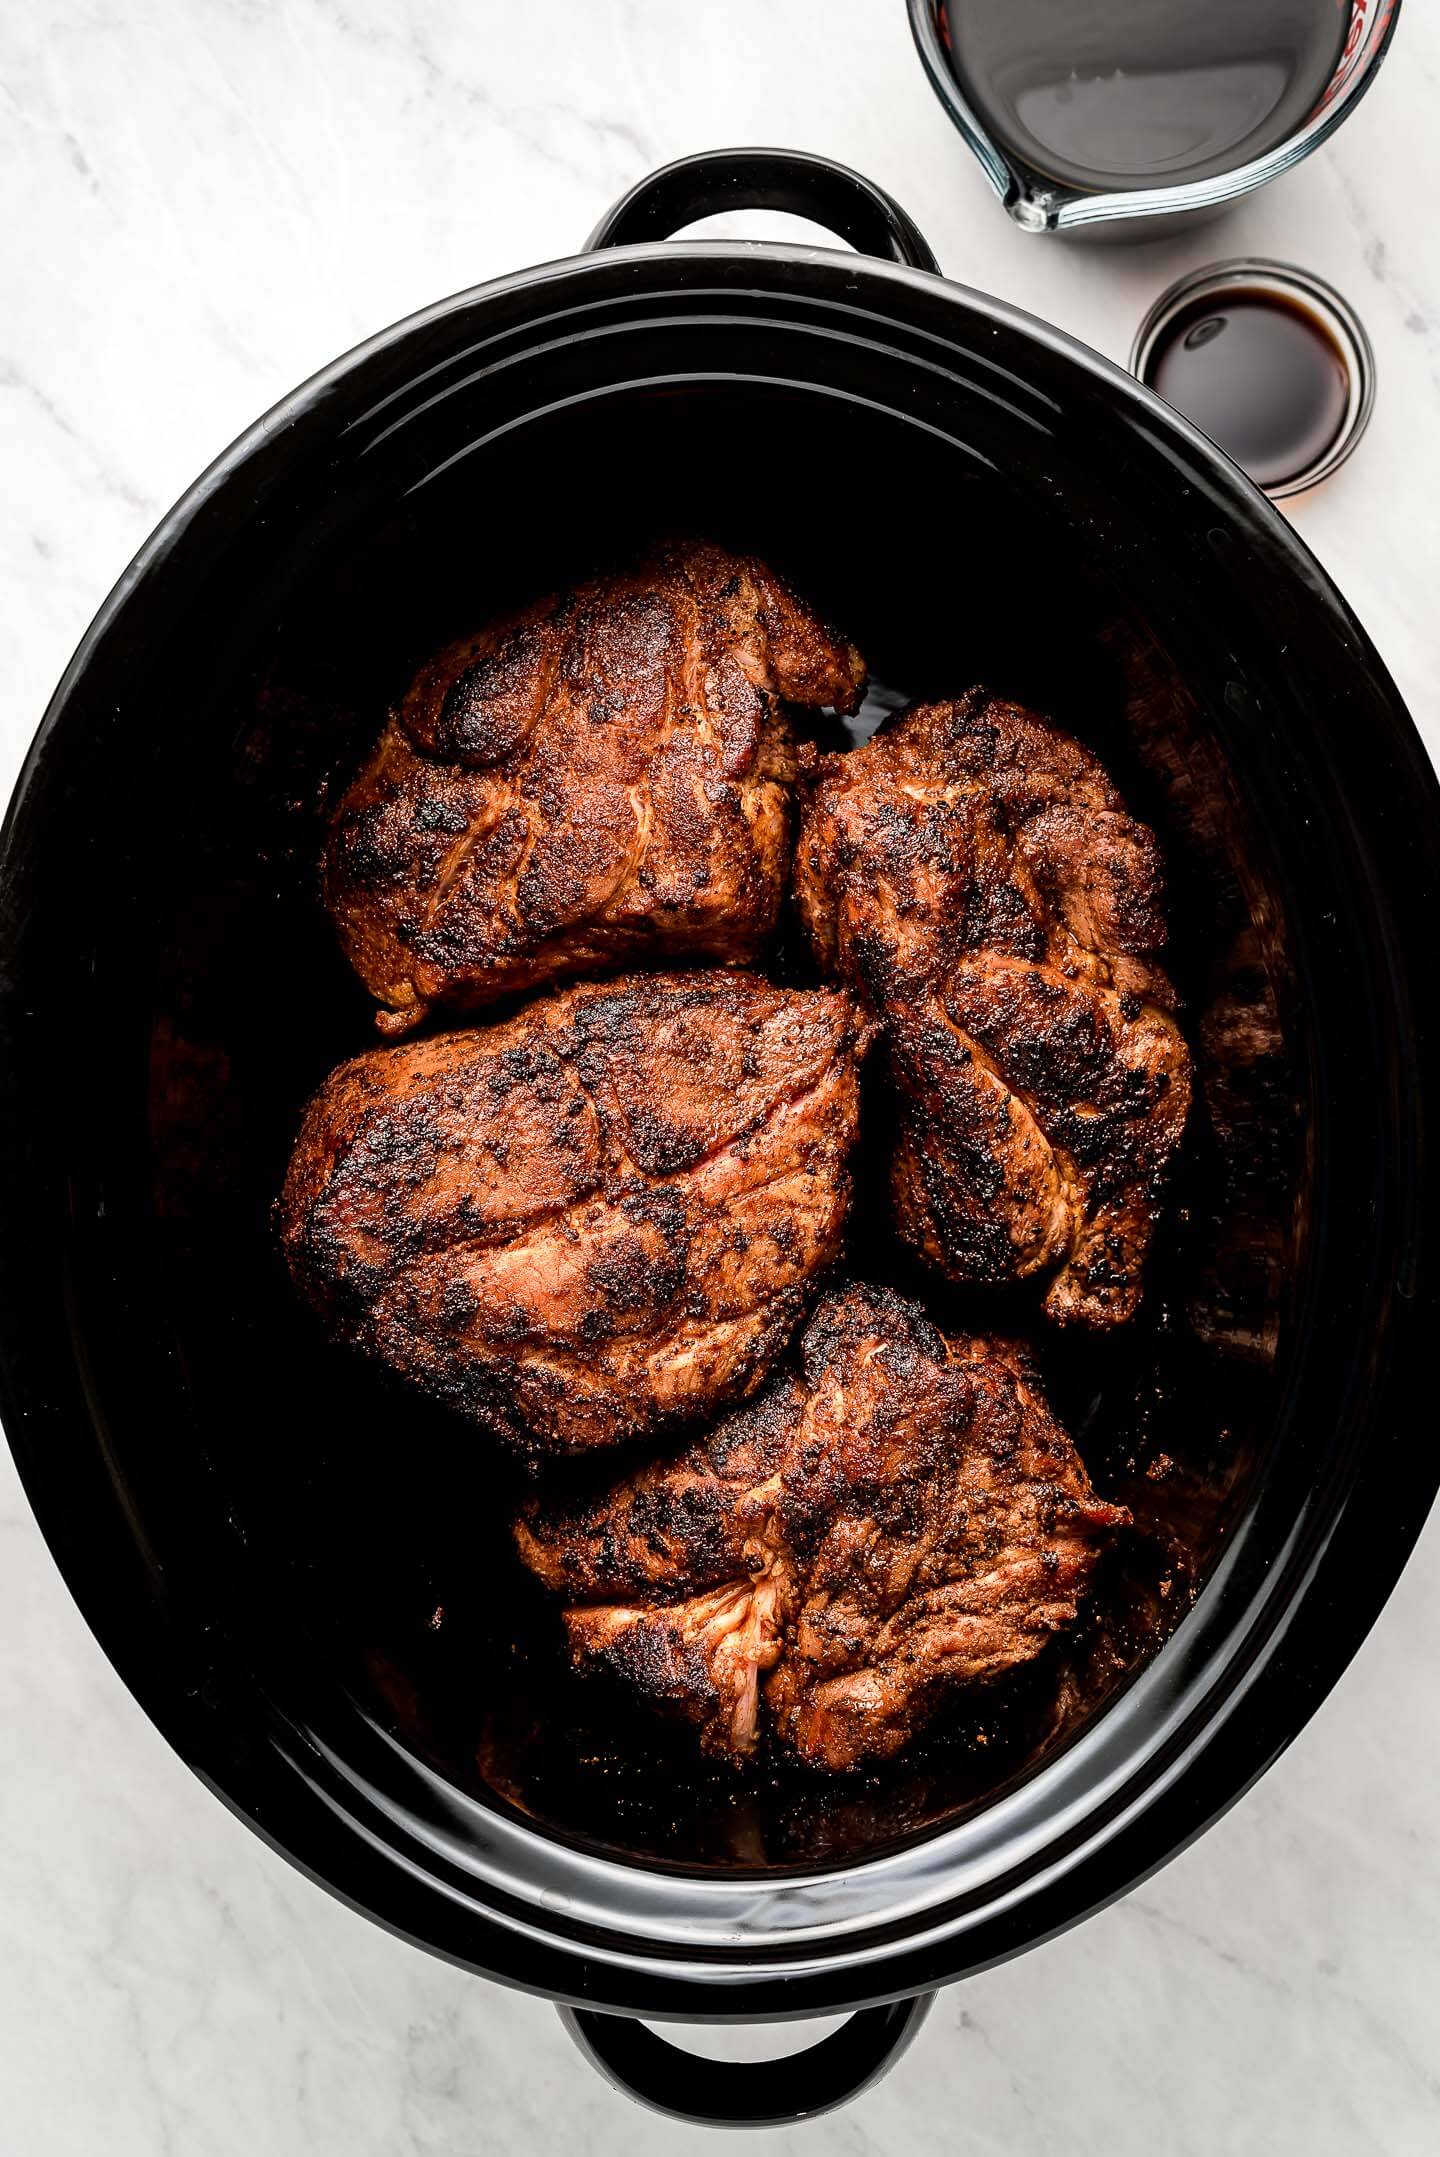 A slow cooker with browned pork roast.